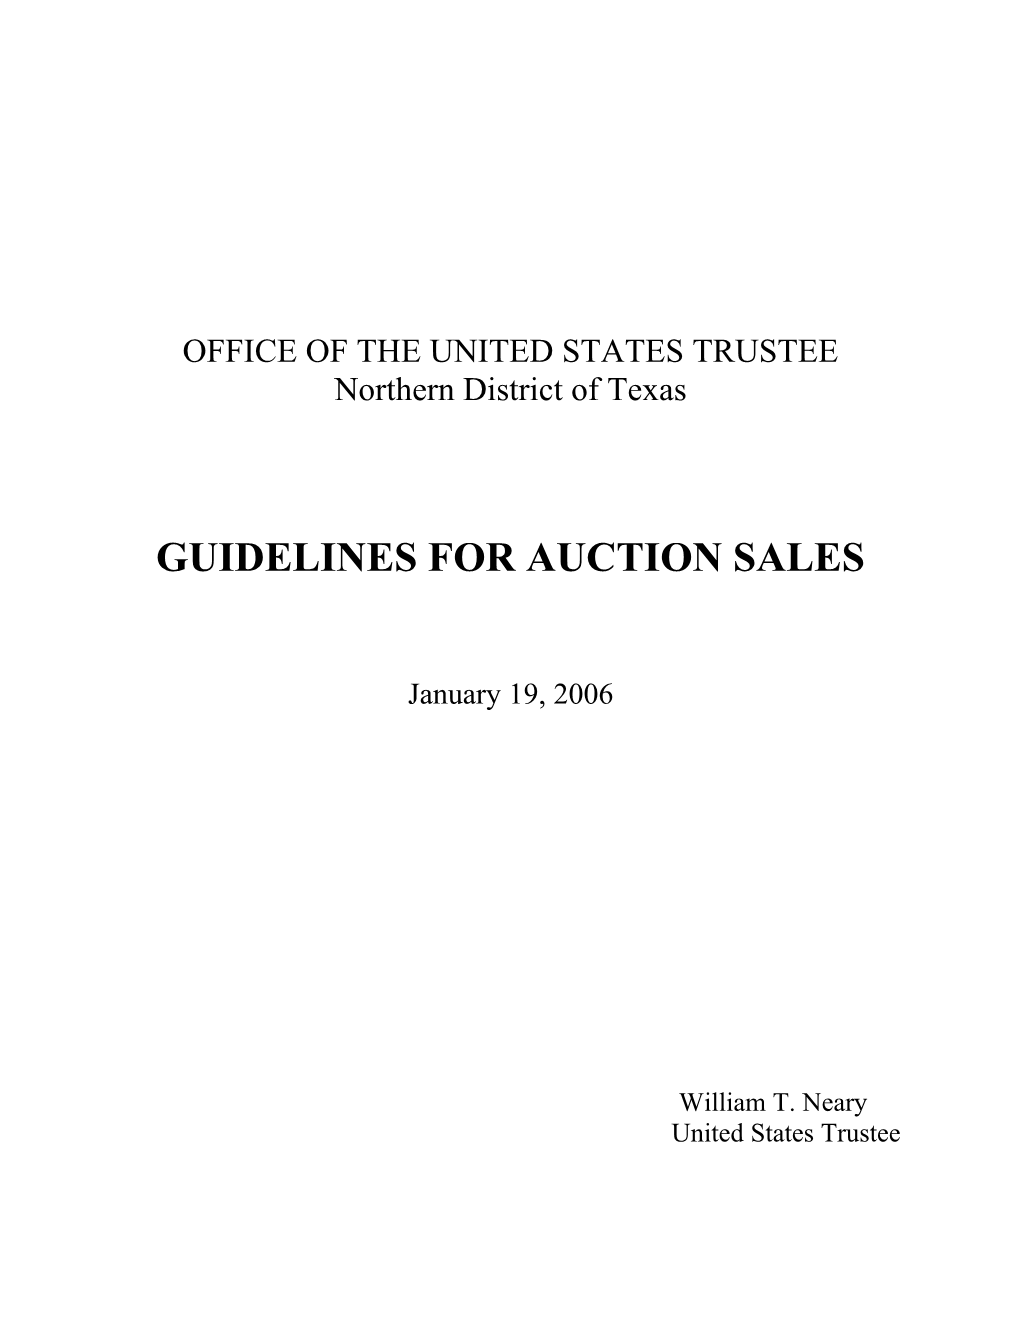 Office of the United States Trustee